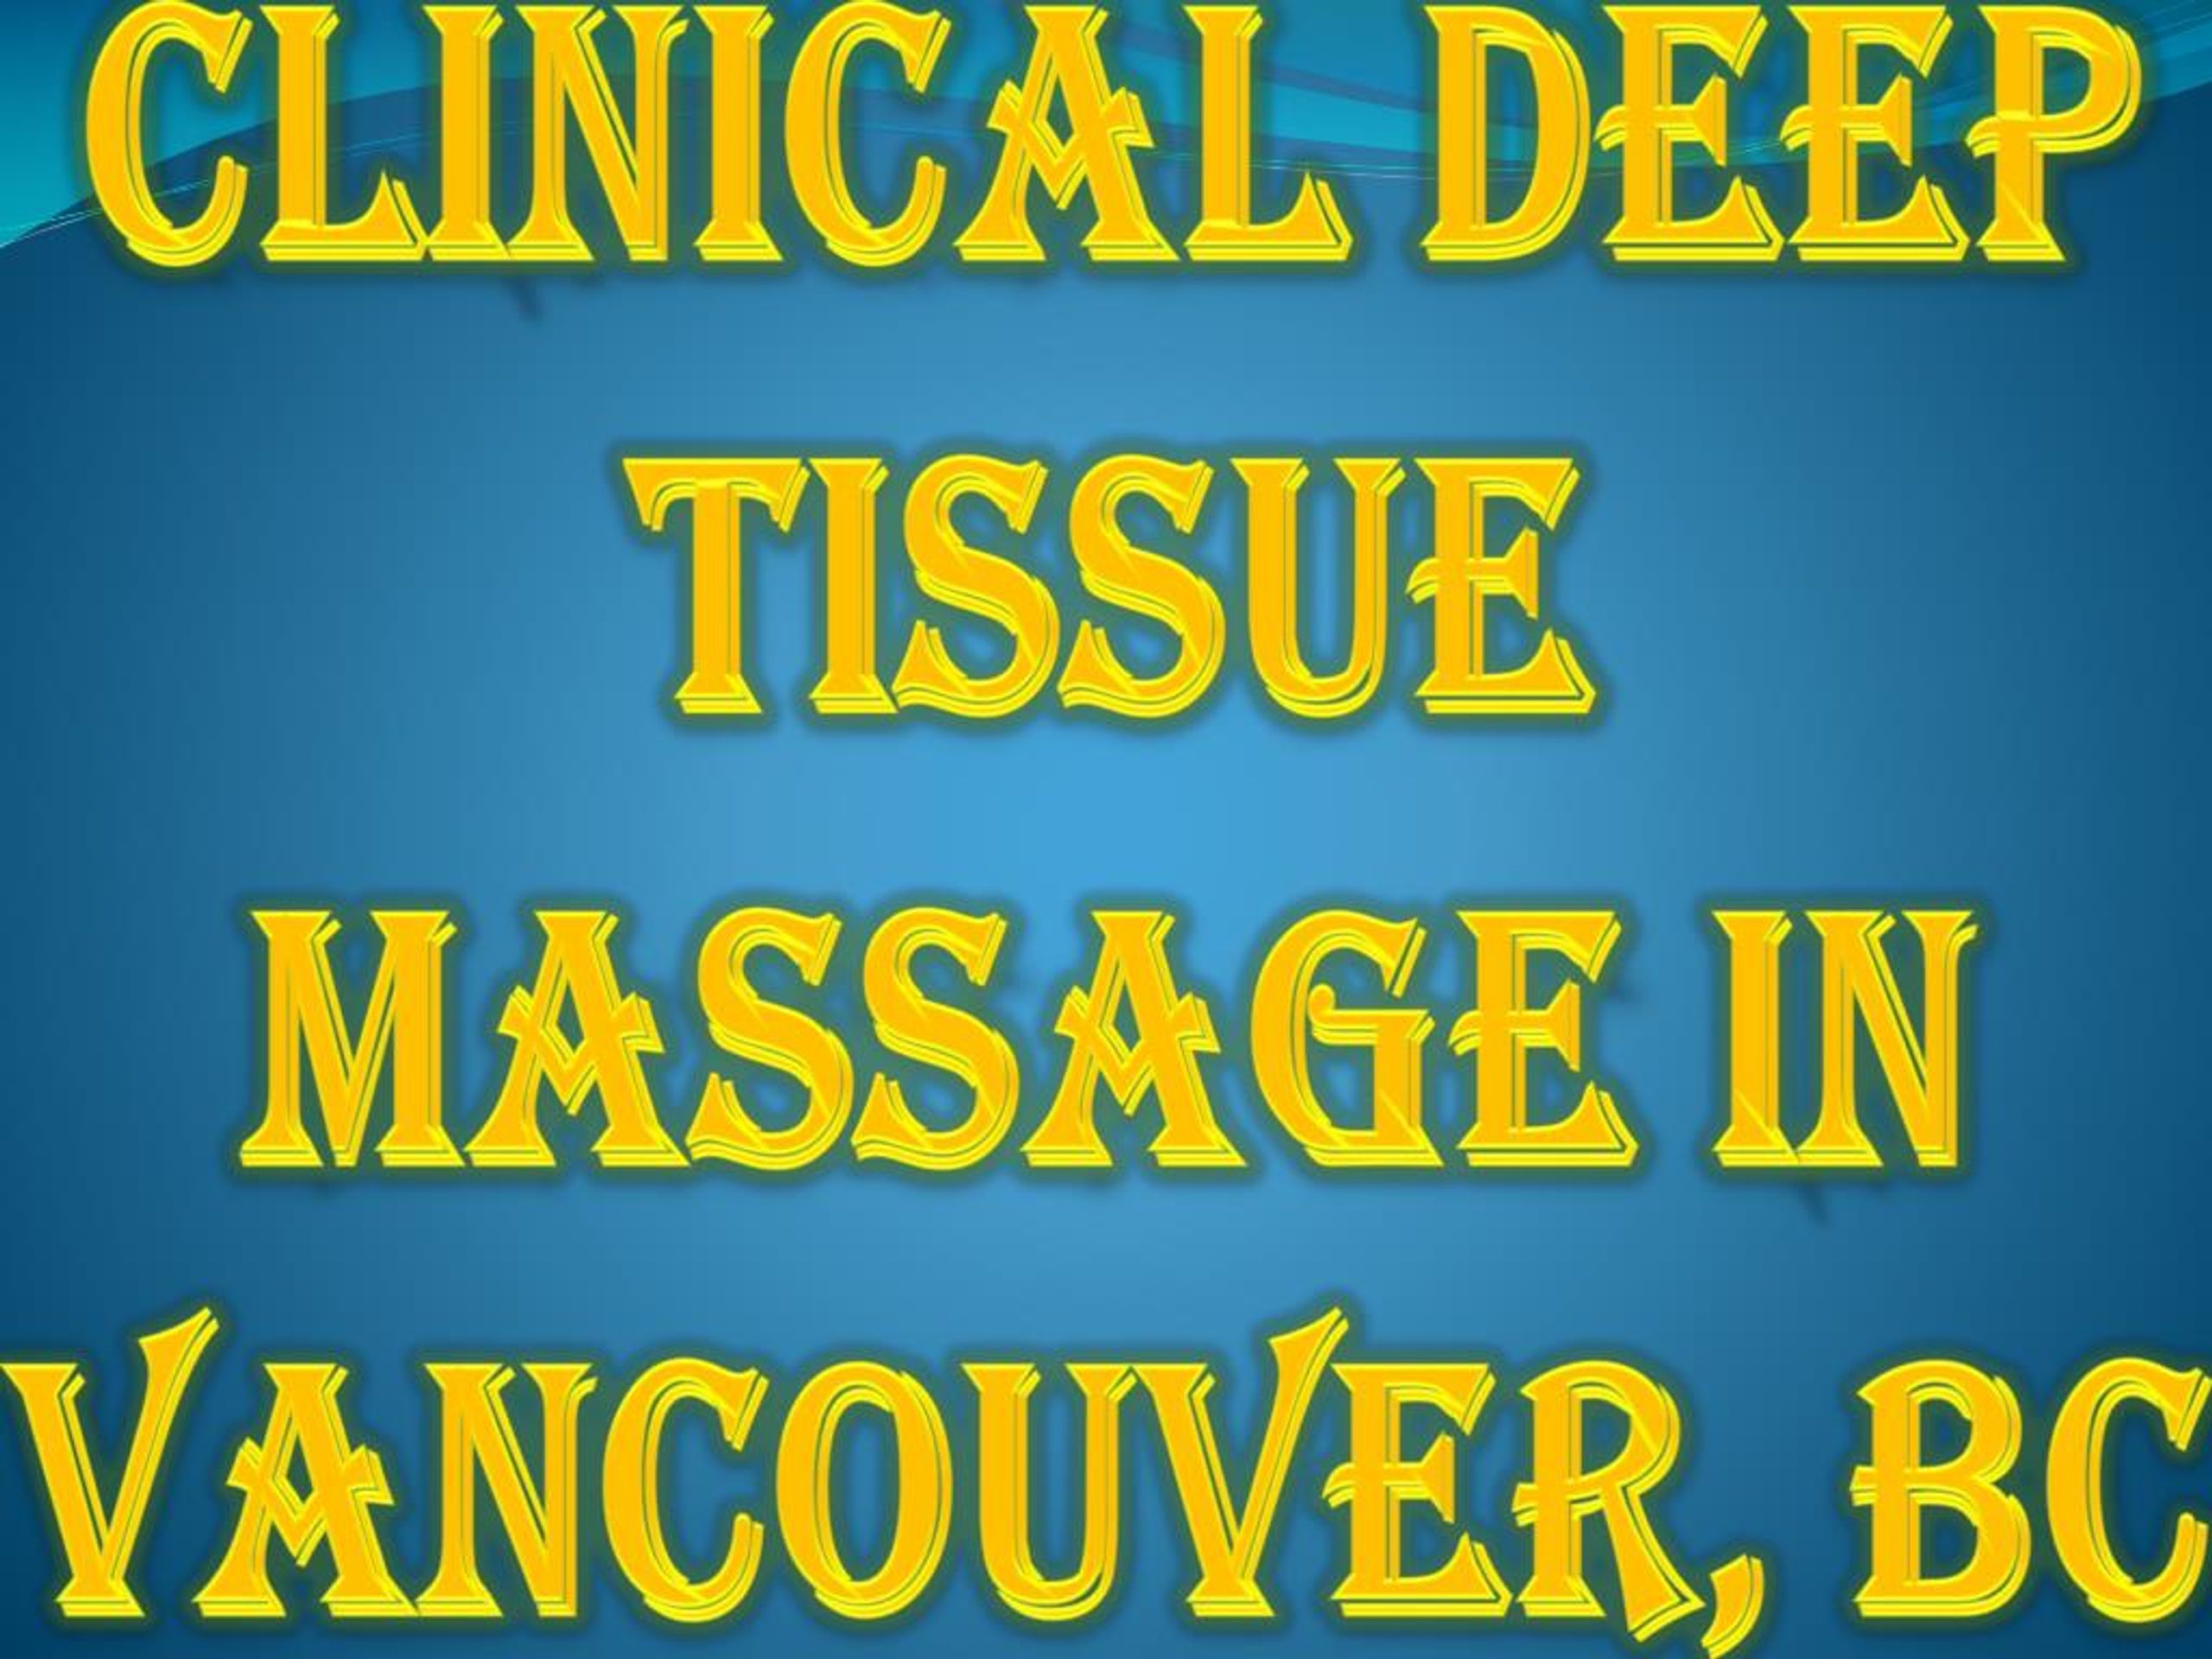 Ppt Clinical Deep Tissue Massage In Vancouver Bc Powerpoint Presentation Id7468909